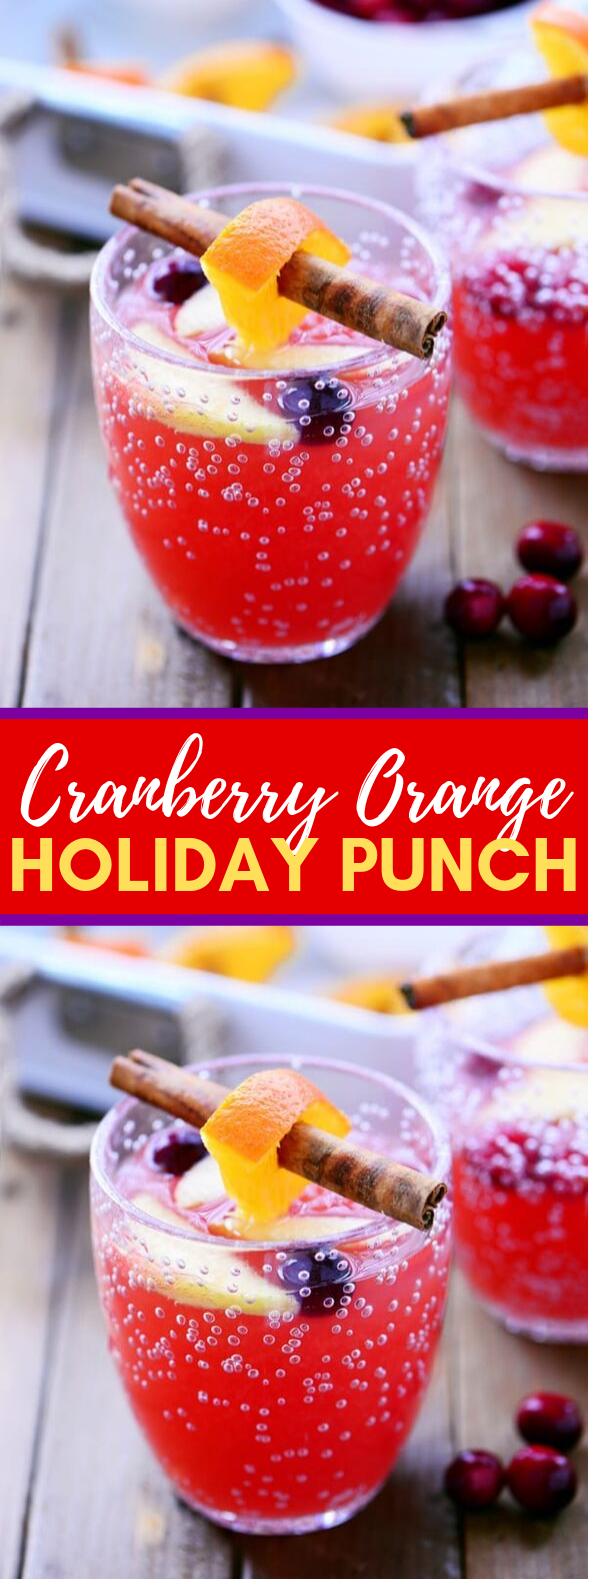 Cranberry Orange Holiday Punch #drinks #thanksgiving